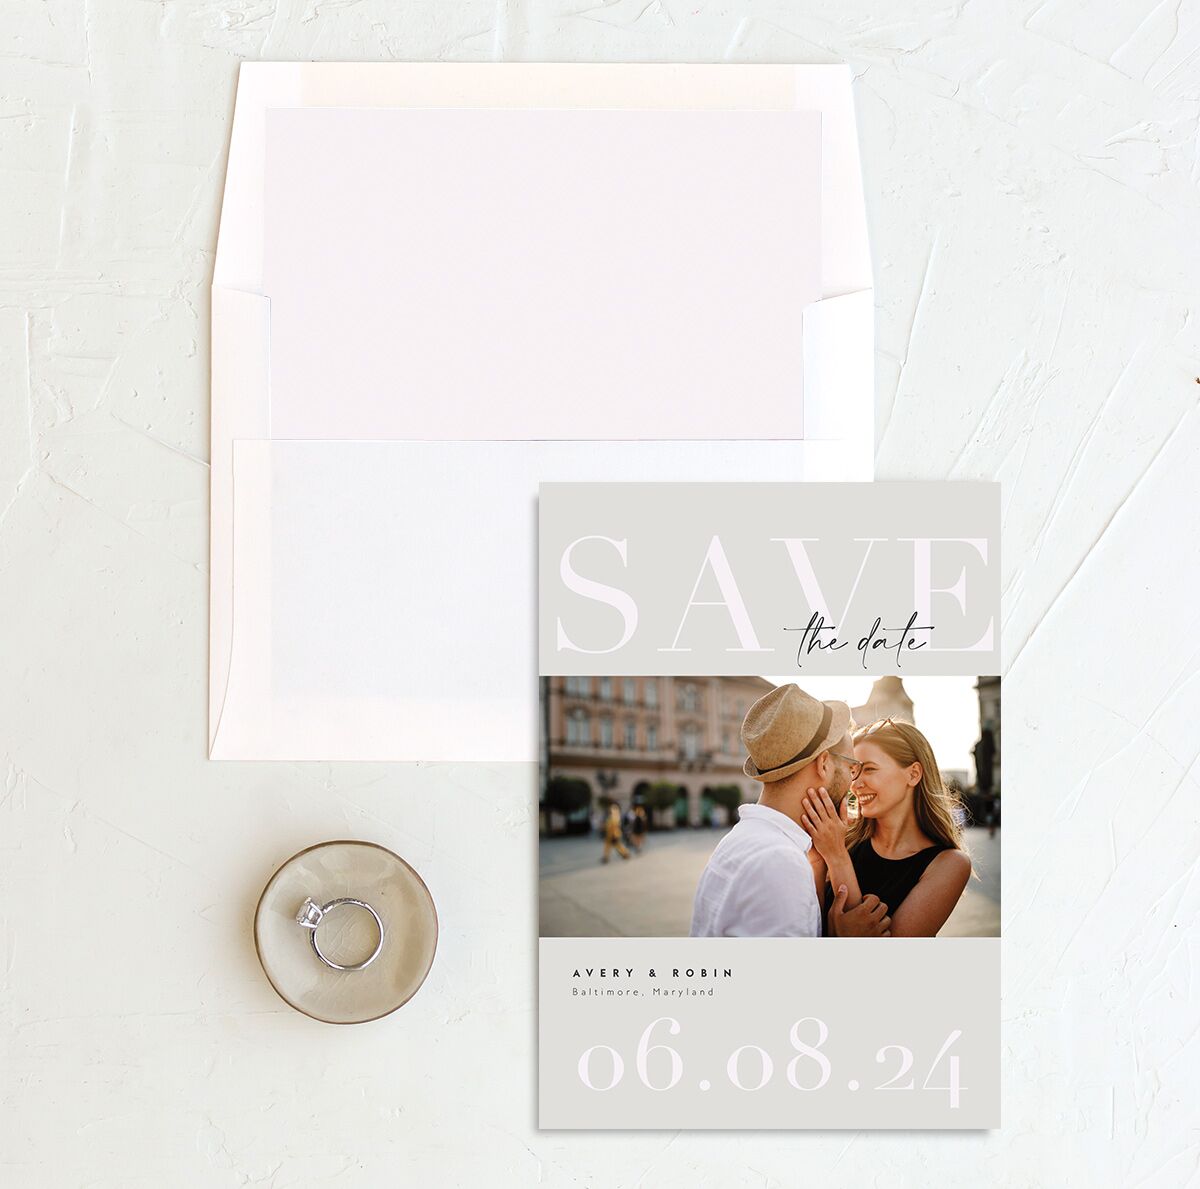 Elegant Contrast Save the Date Cards envelope-and-liner in grey